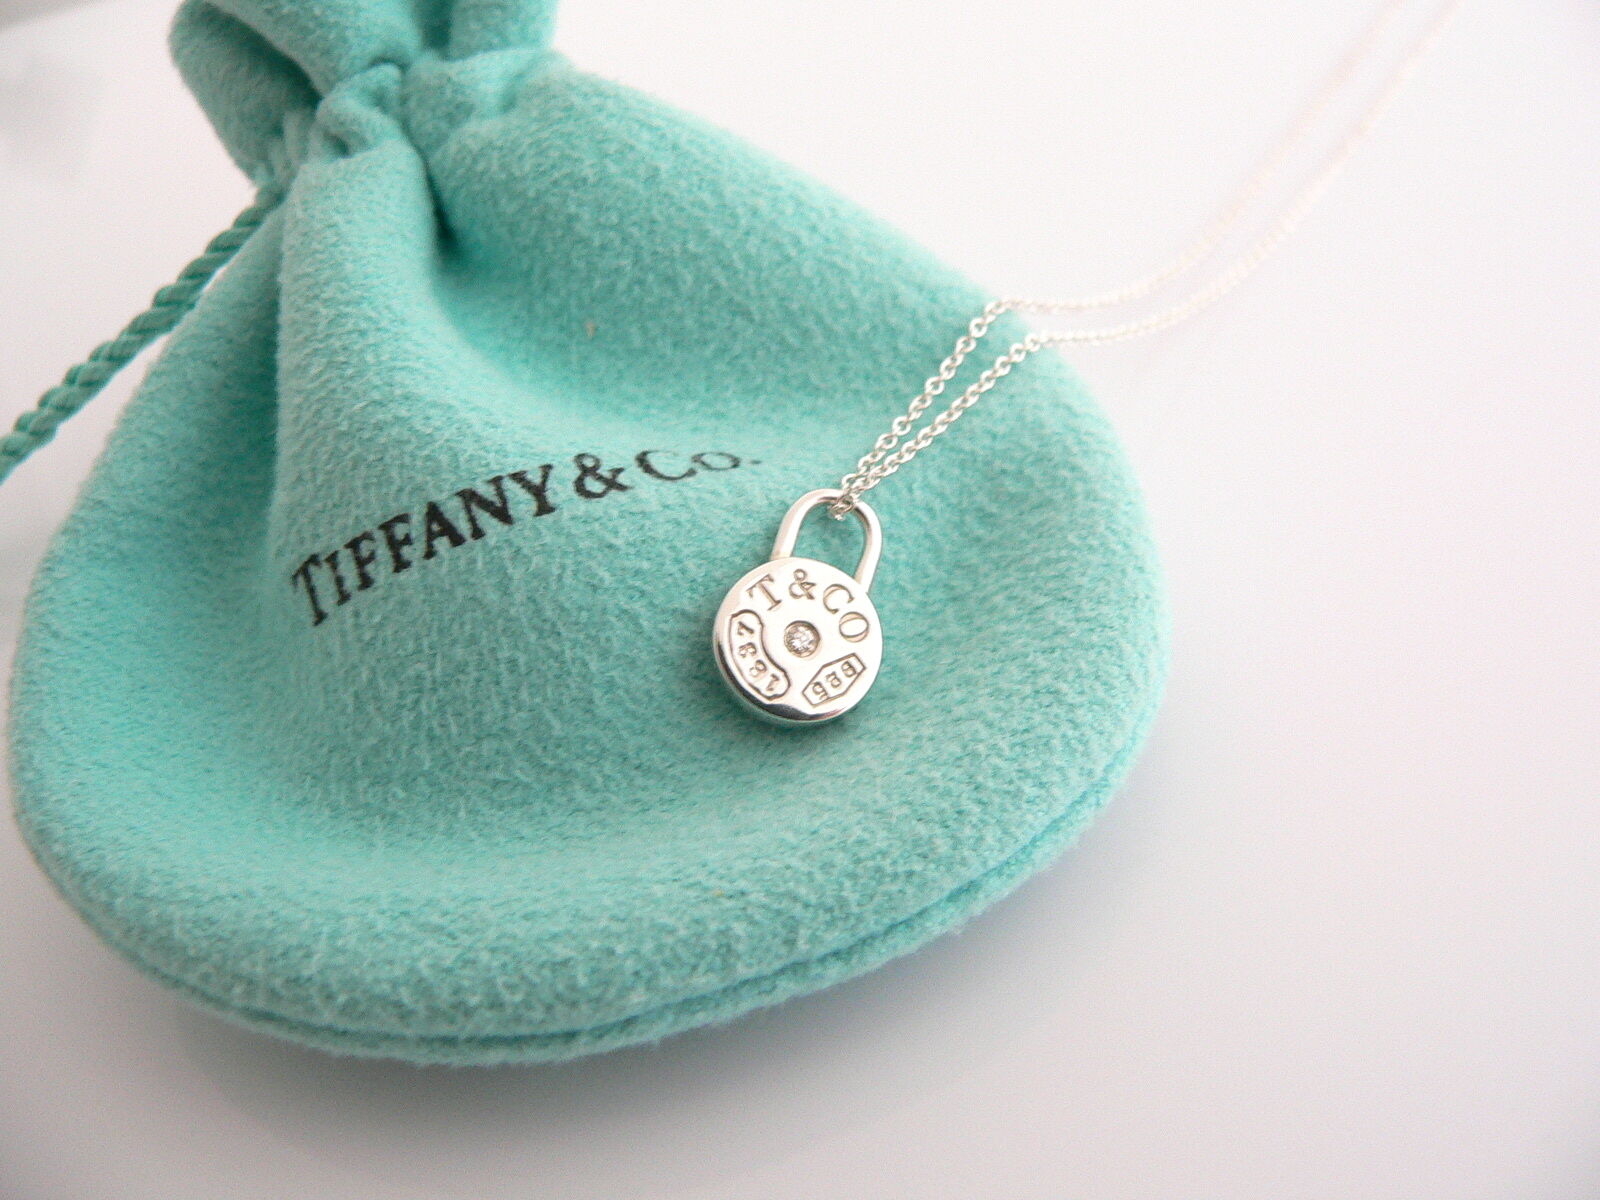 Pin by Ely M on Accessories!!  Expensive necklaces, Tiffany and co, Diamond